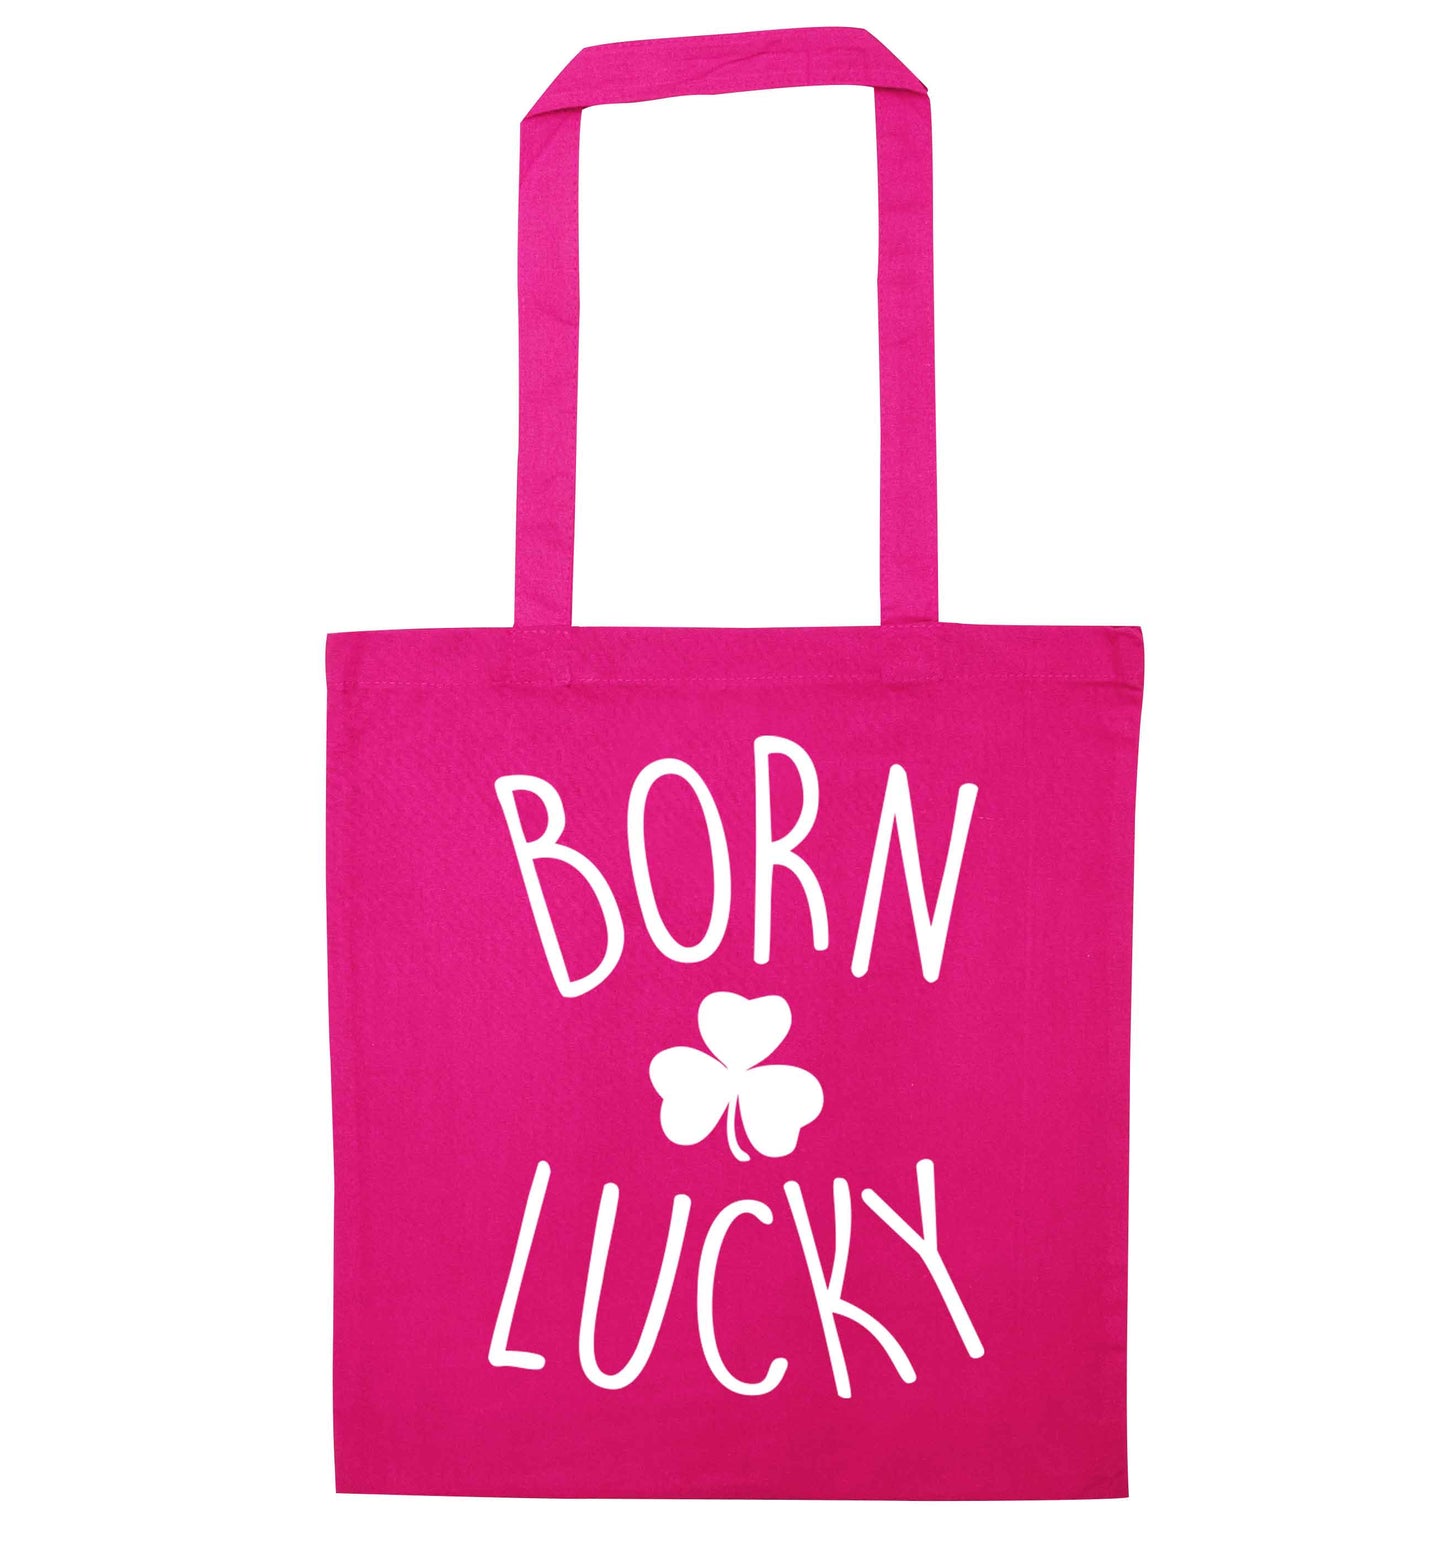  Born Lucky pink tote bag